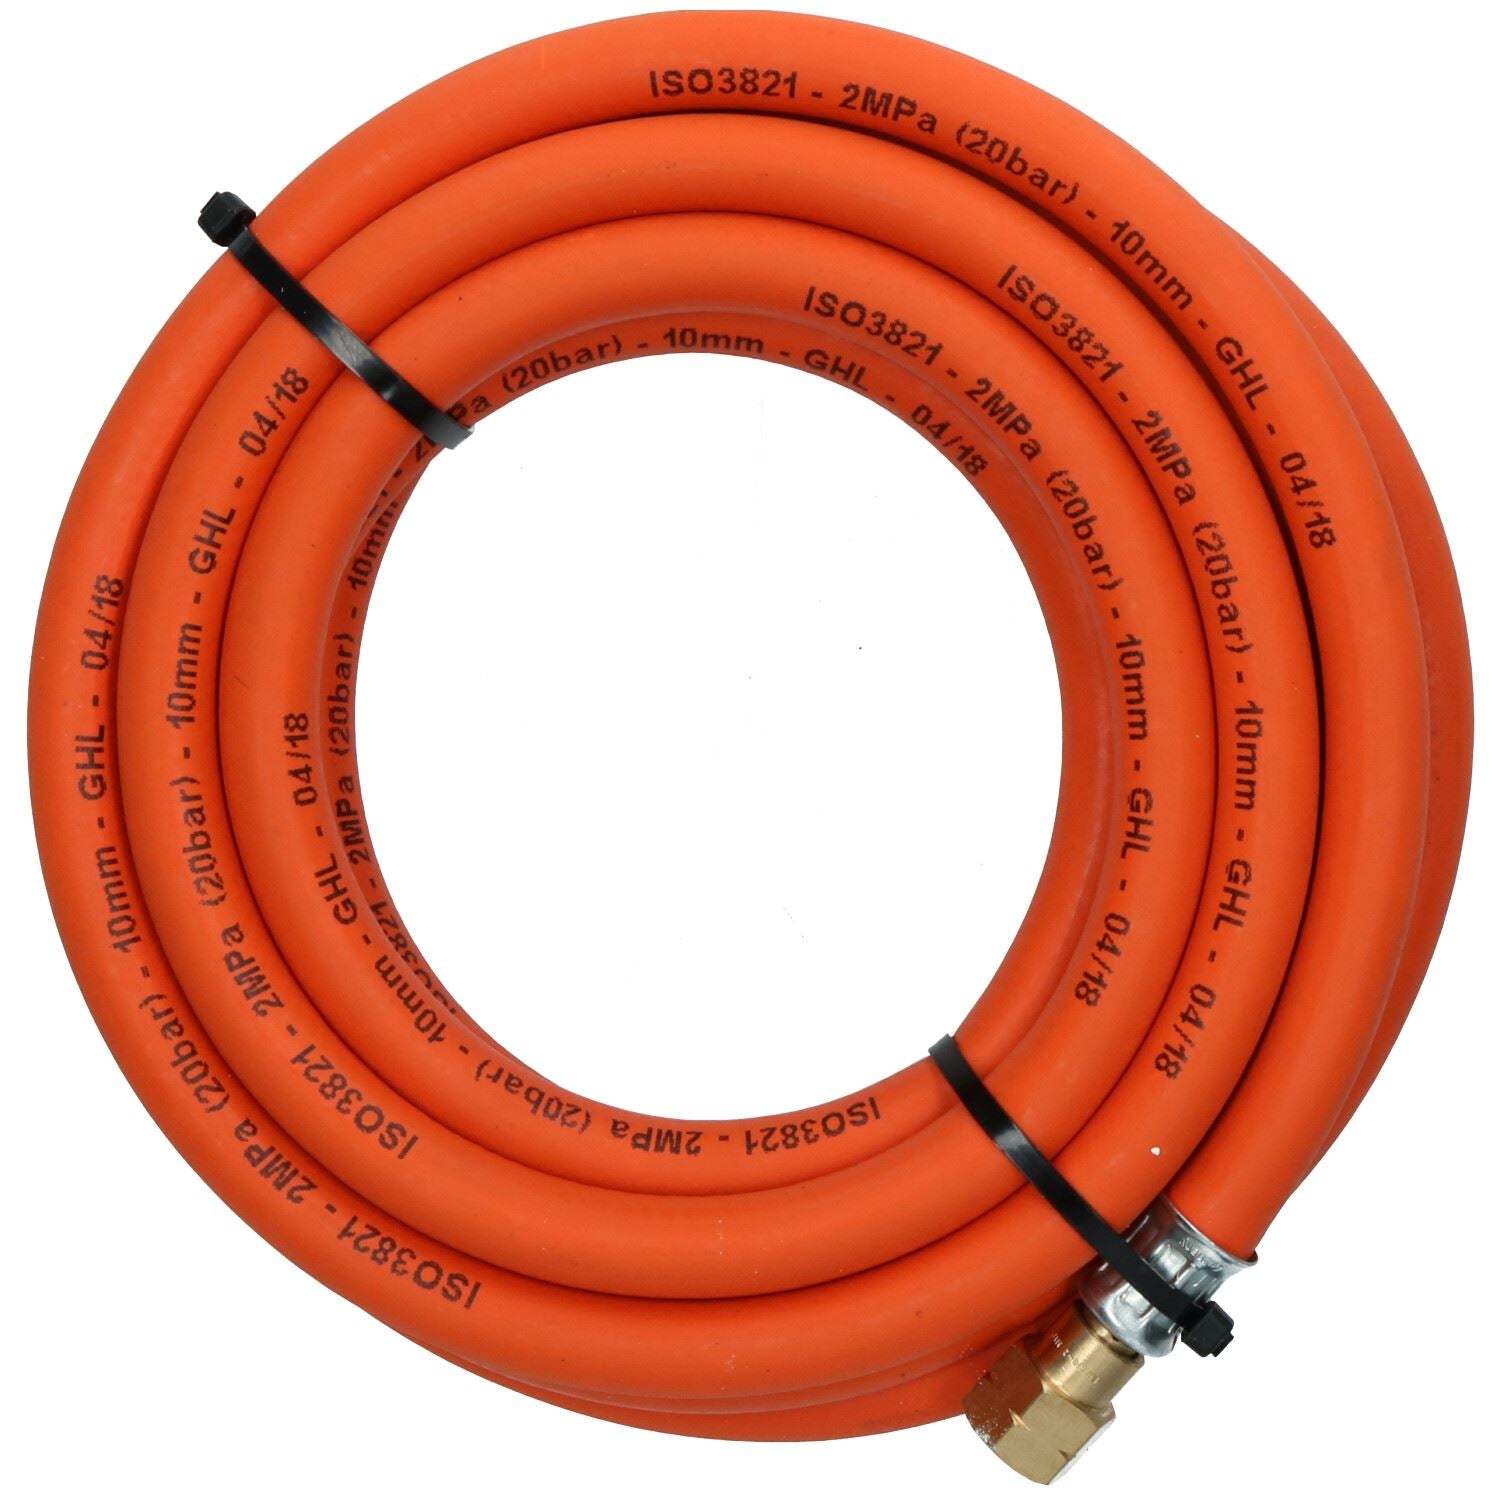 Single Propane Fitted Rubber Hose Pipe Cutting & Welding 5M 3/8" BSP Gas